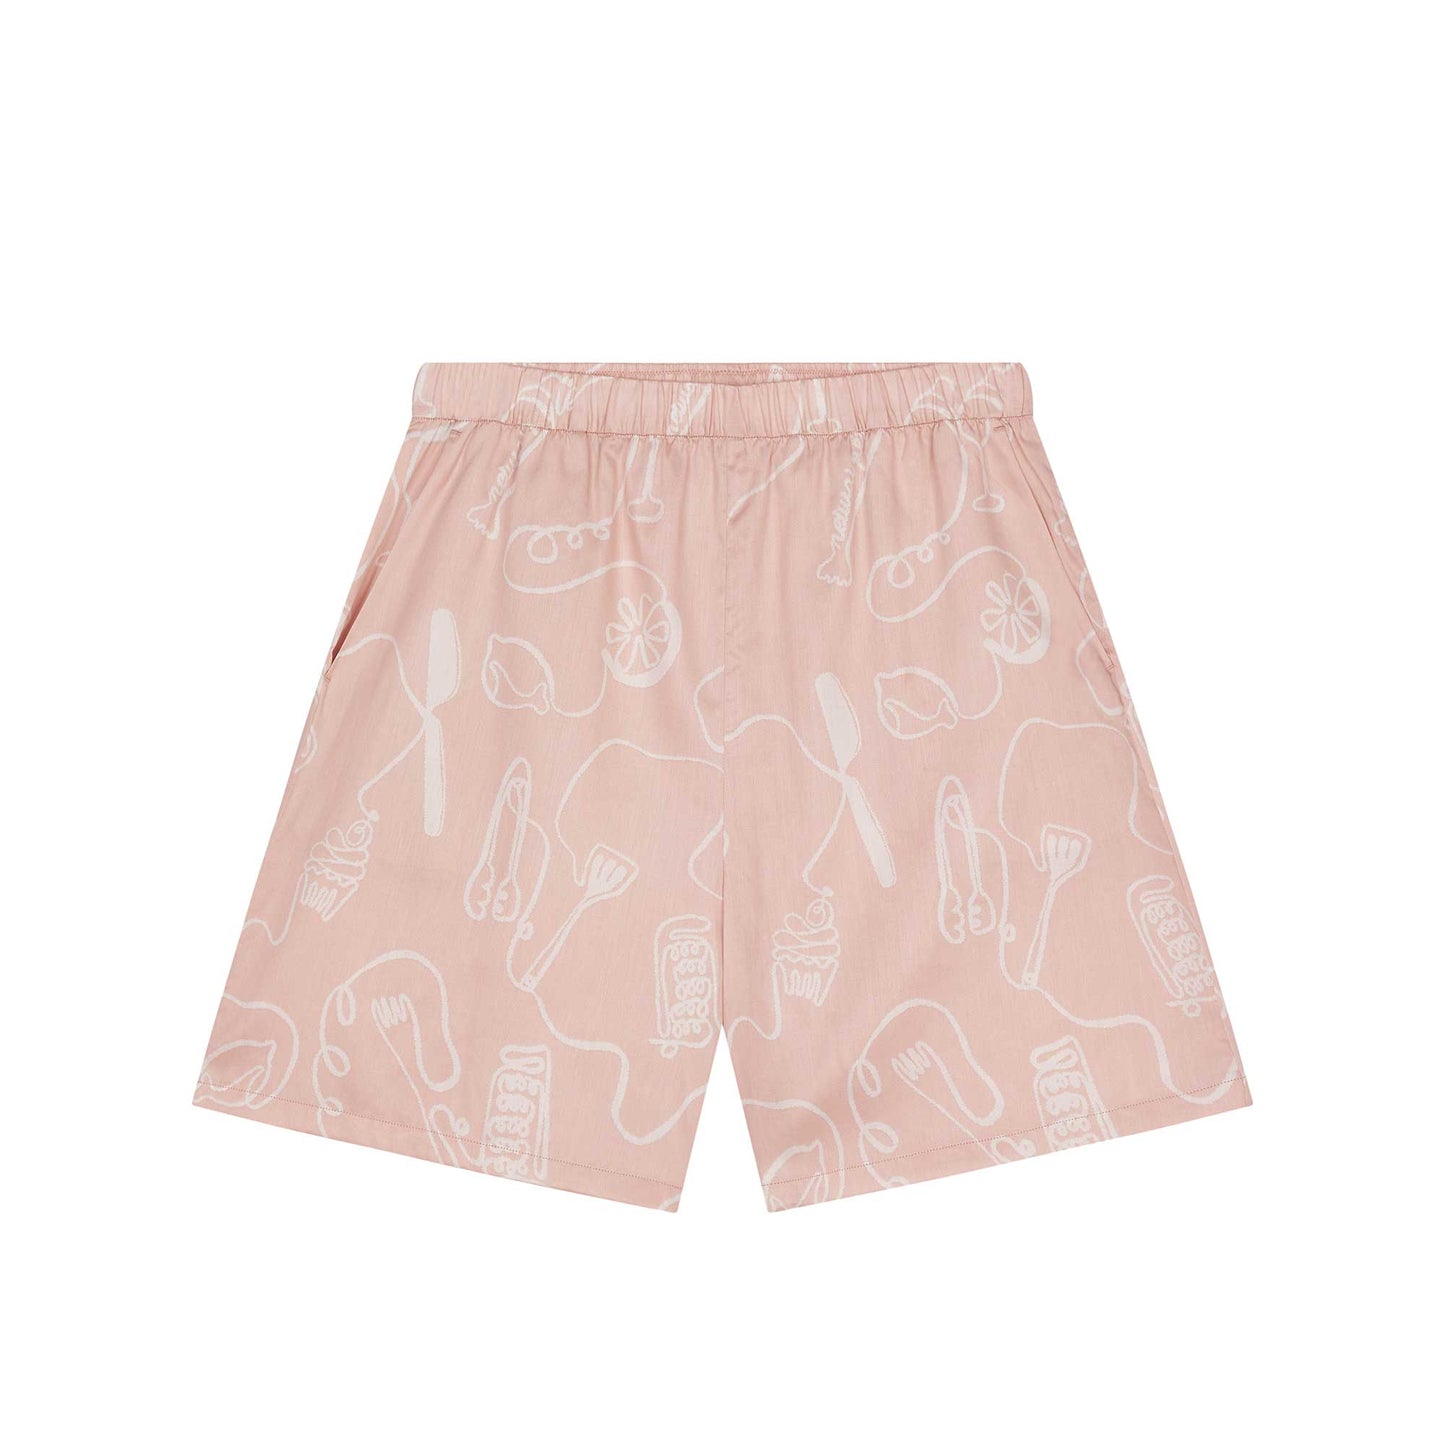 flat lay image of pink pajama shorts with white sketches